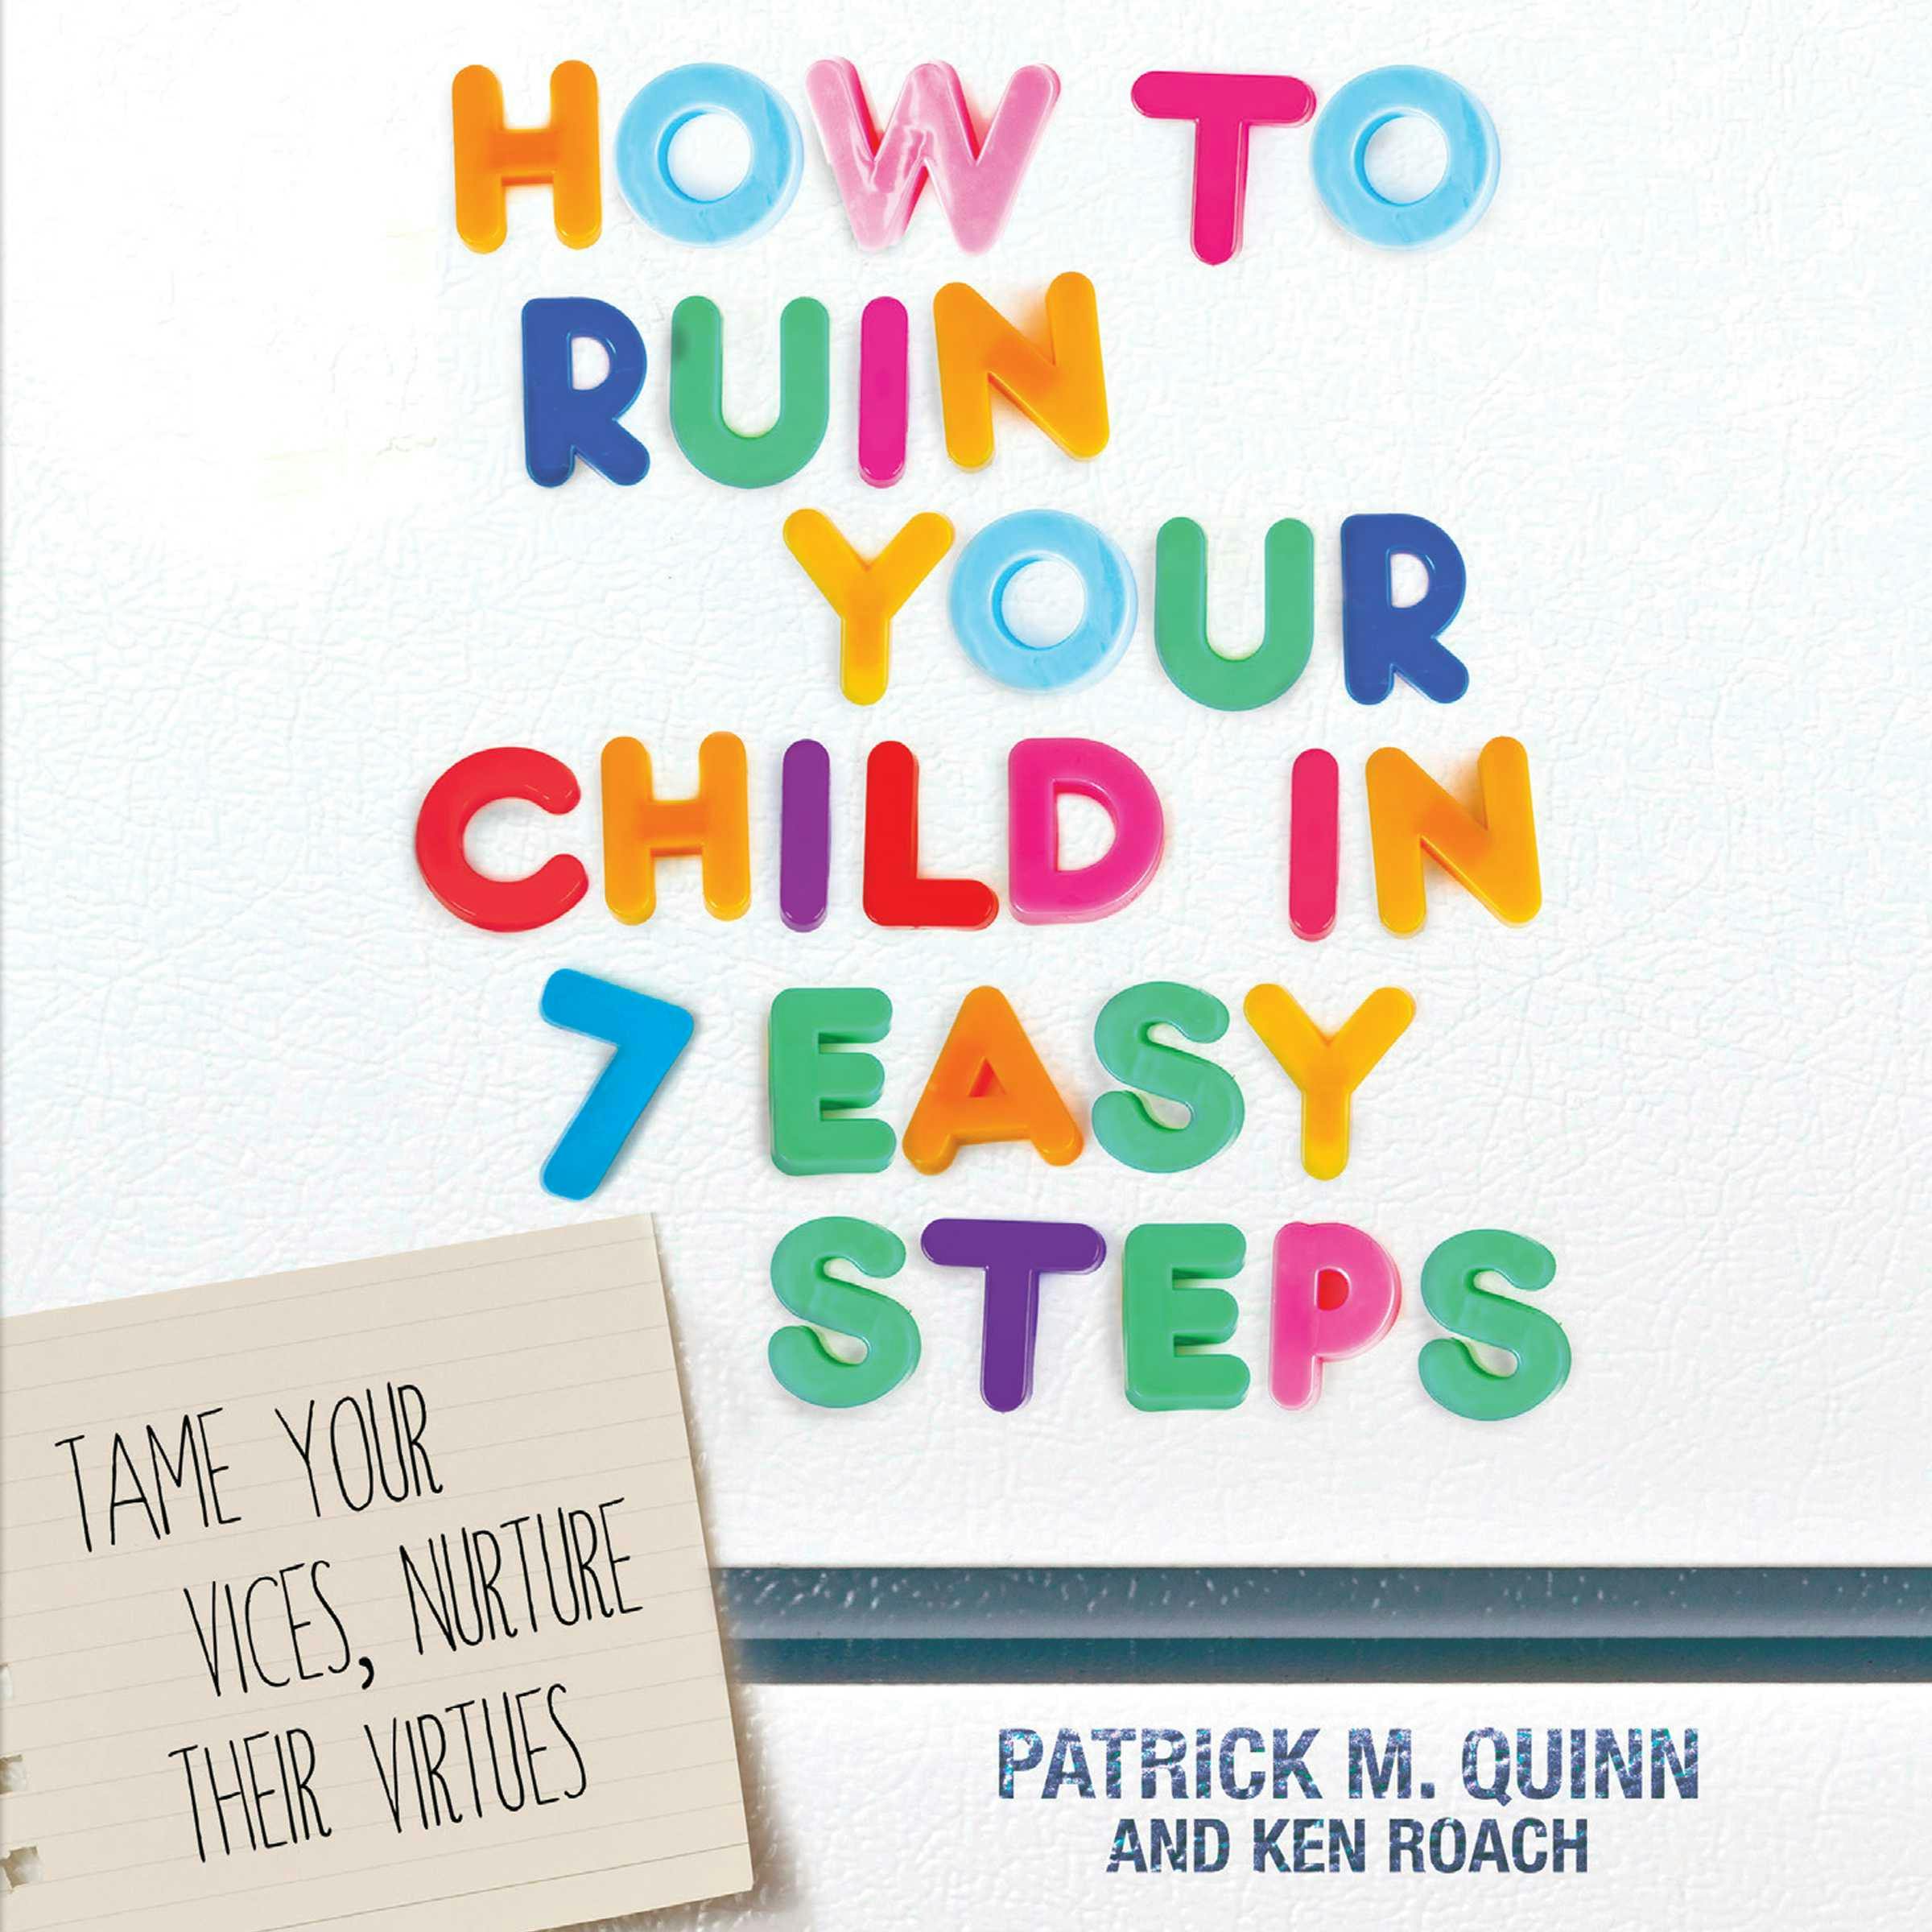 How to Ruin Your Child in 7 Easy Steps: Tame Your Vices, Nurture Their Virtues - undefined